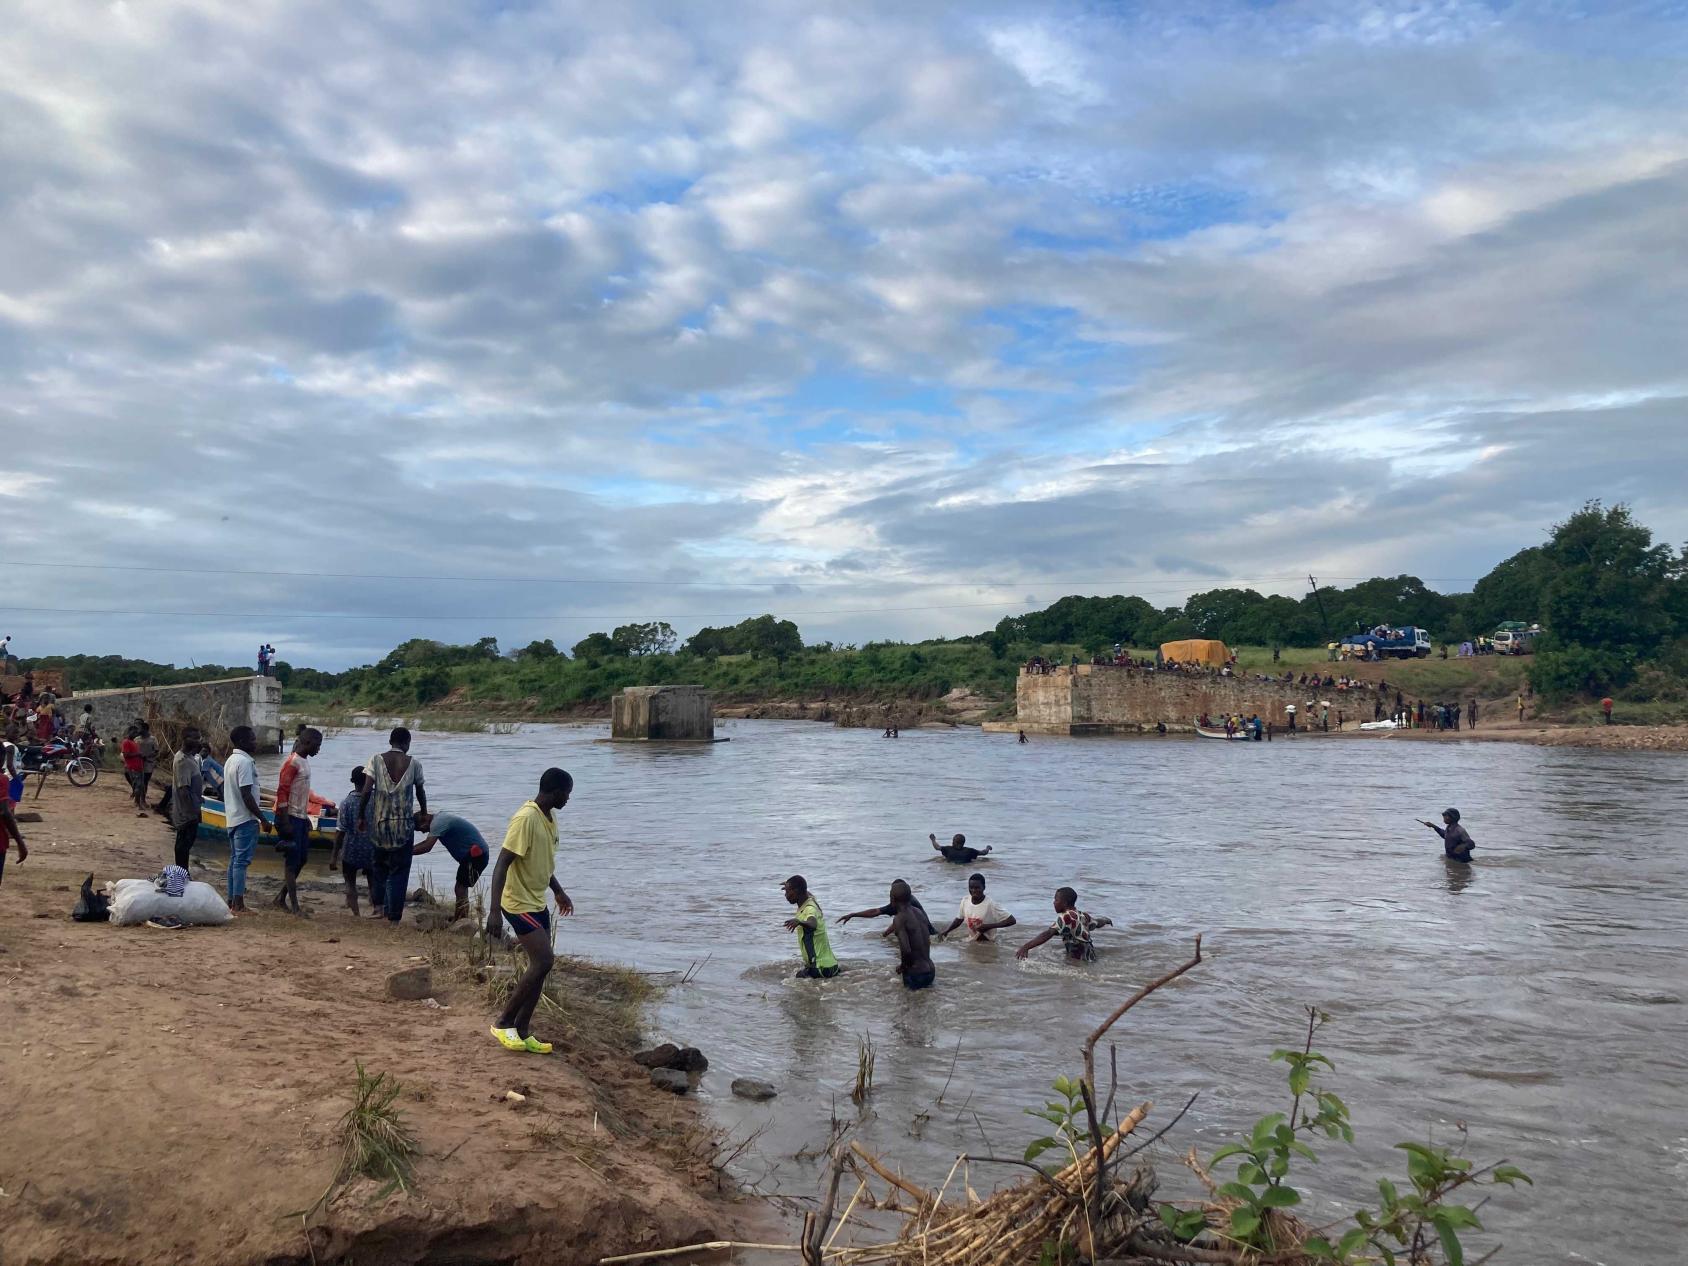 Children play near a river, with a cloudy sky above. 